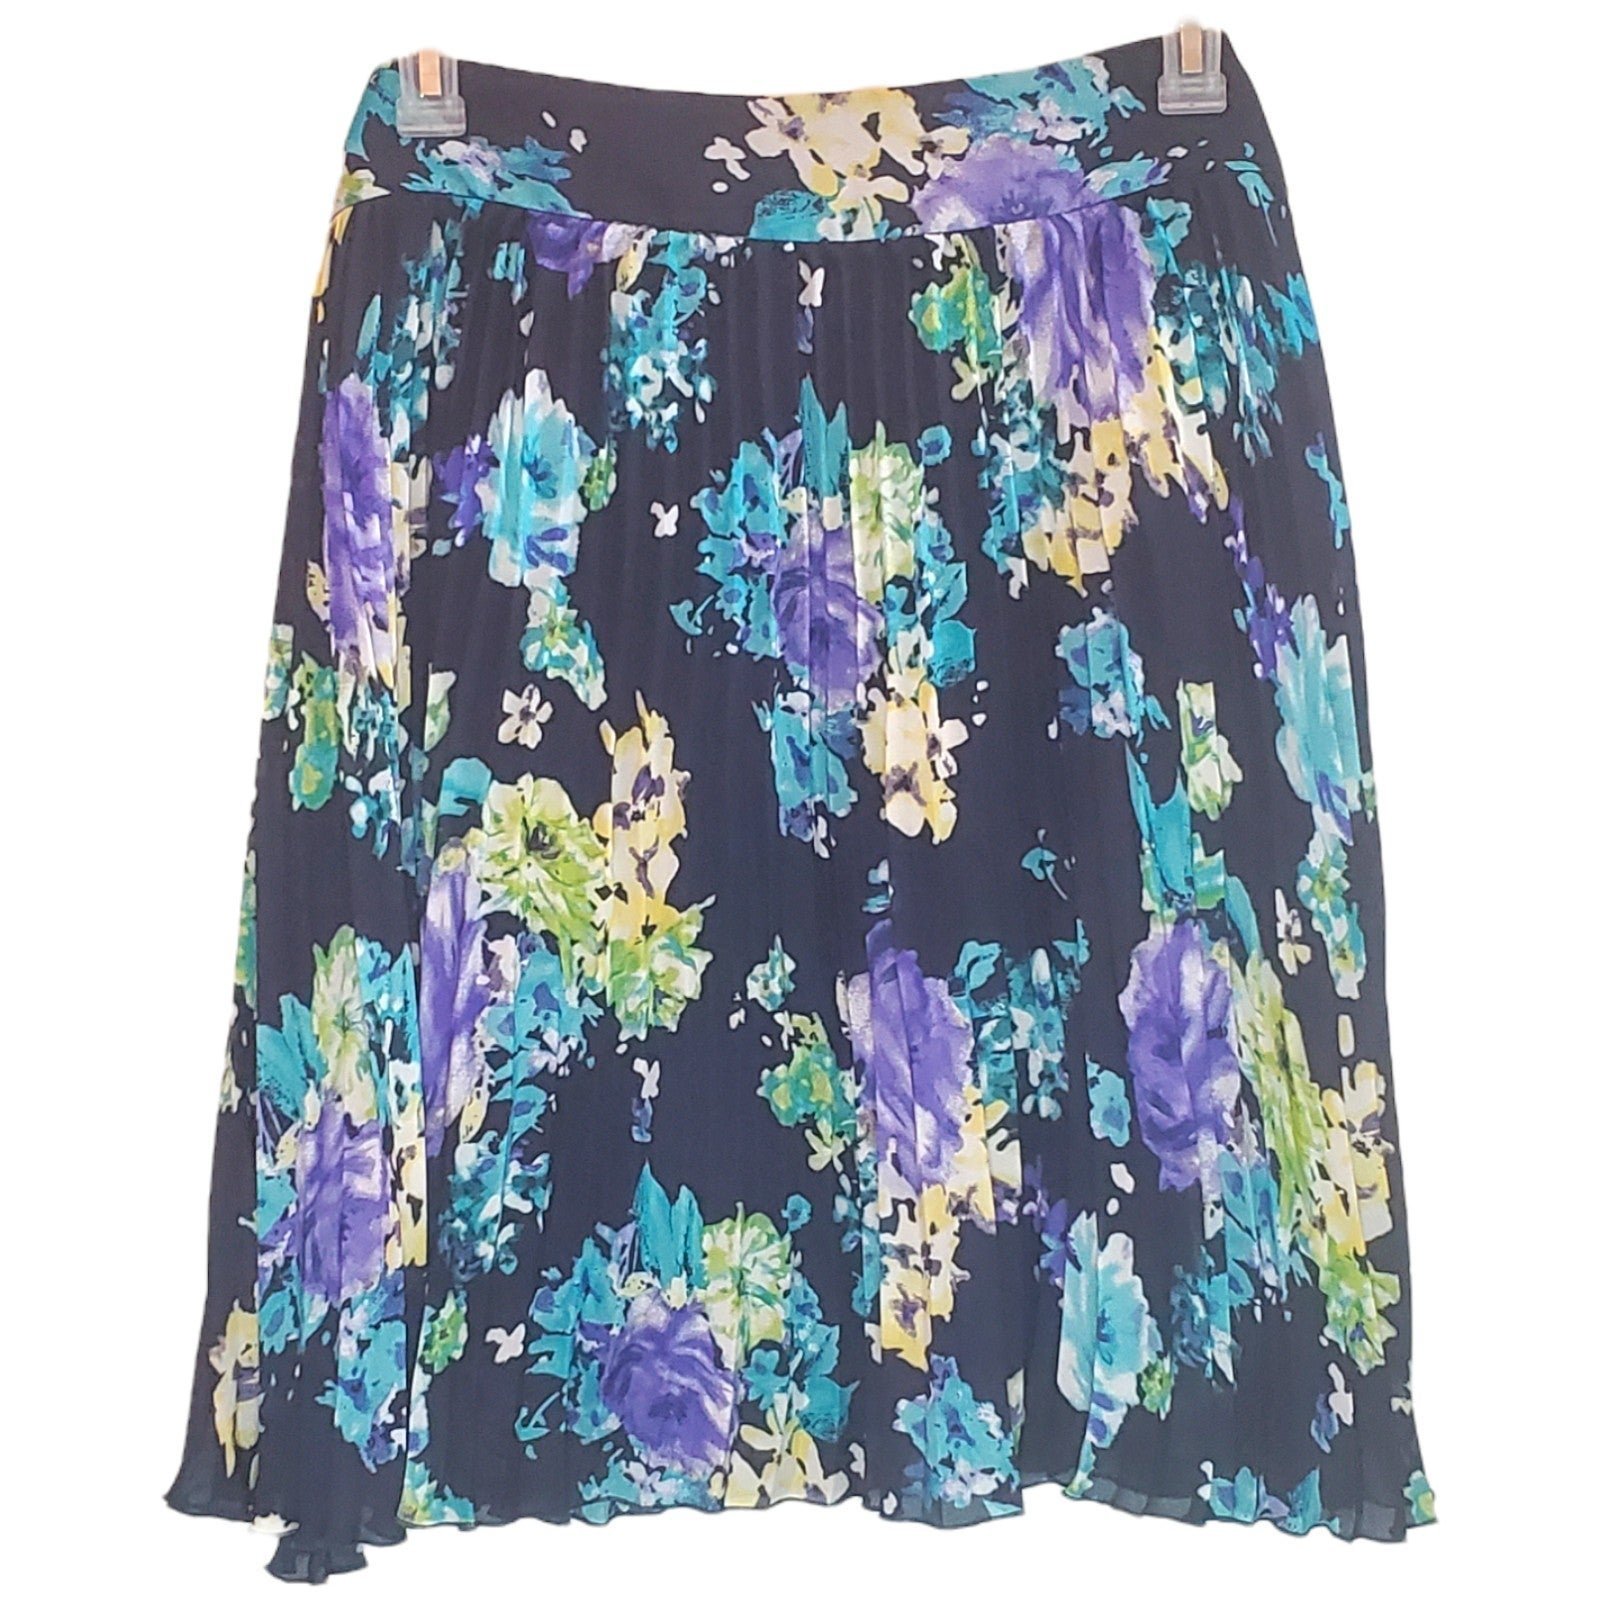 cheapest place to buy  Charter Club Womens Floral Skirt Size 16 Navy Blue Pleated Knee Length NWT oA1I5RuBp Counter Genuine 